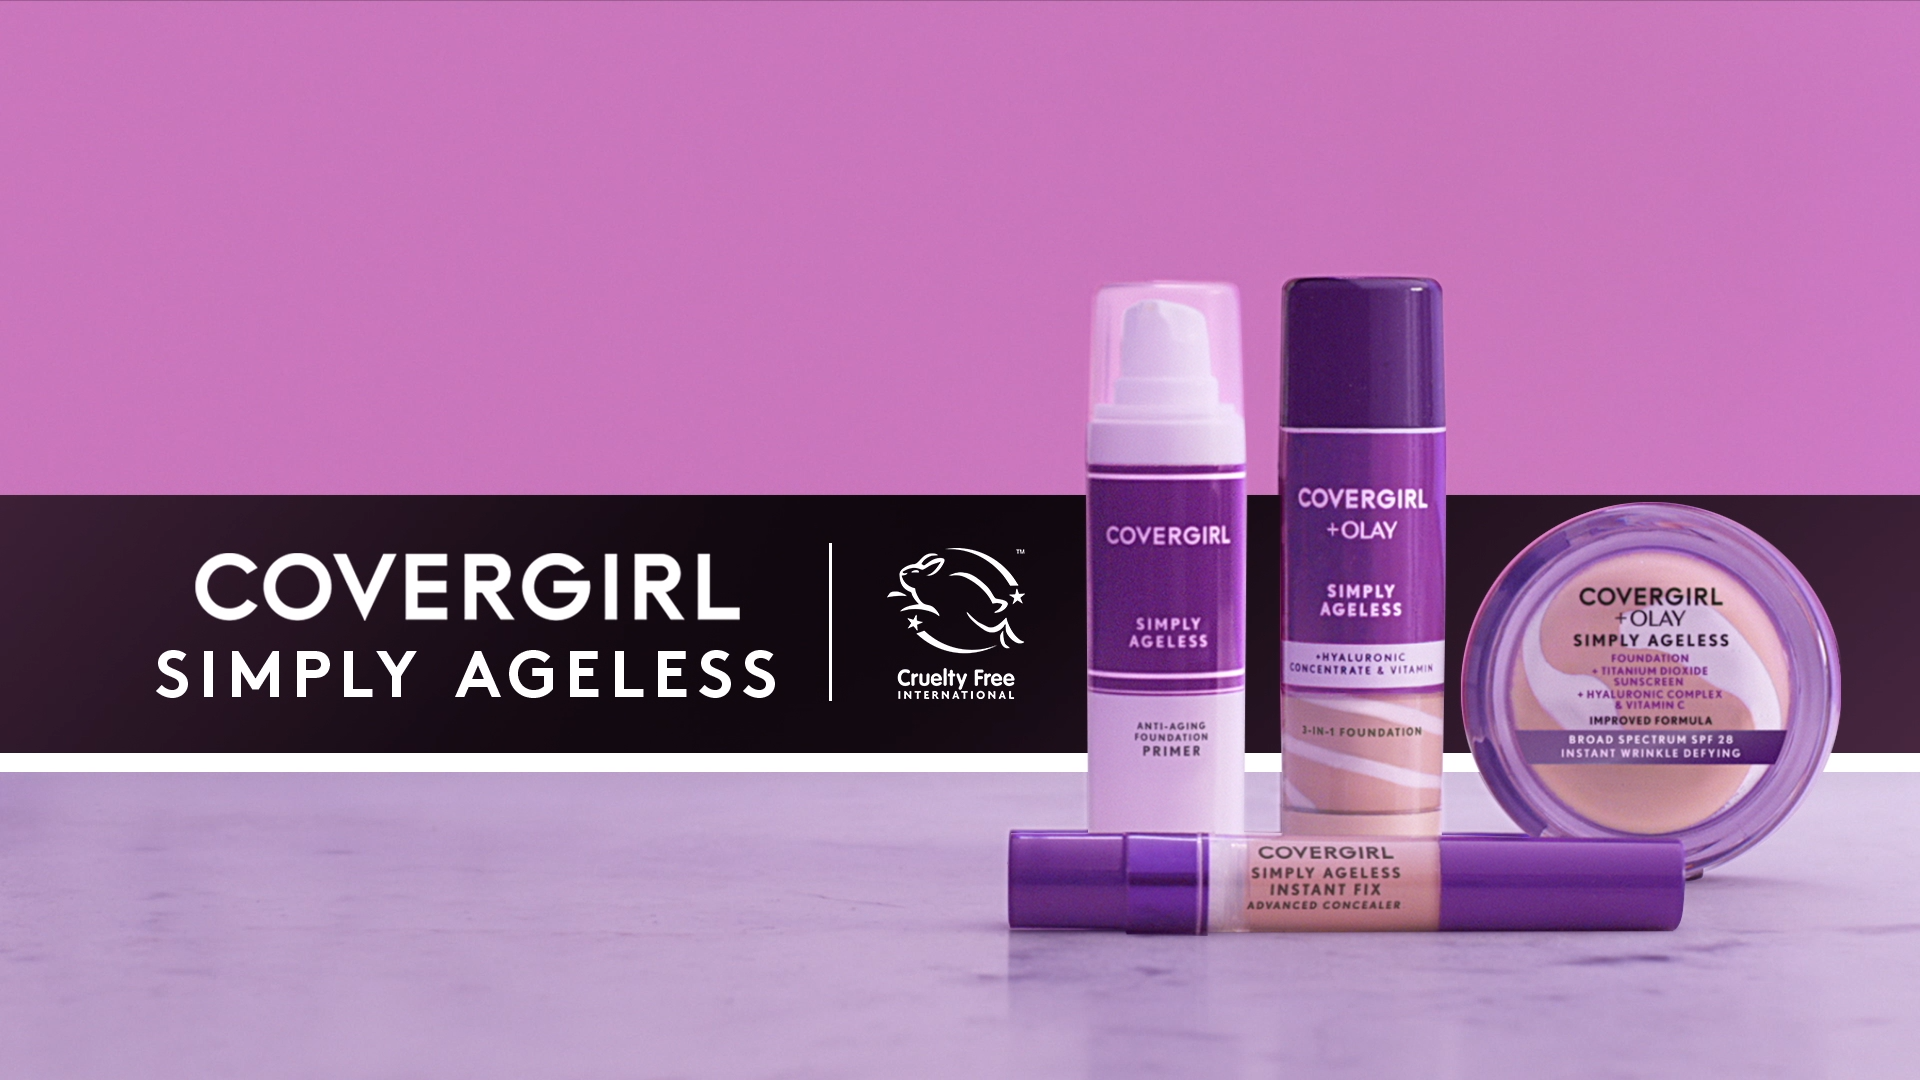 COVERGIRL Simply Ageless -   beauty Therapy design